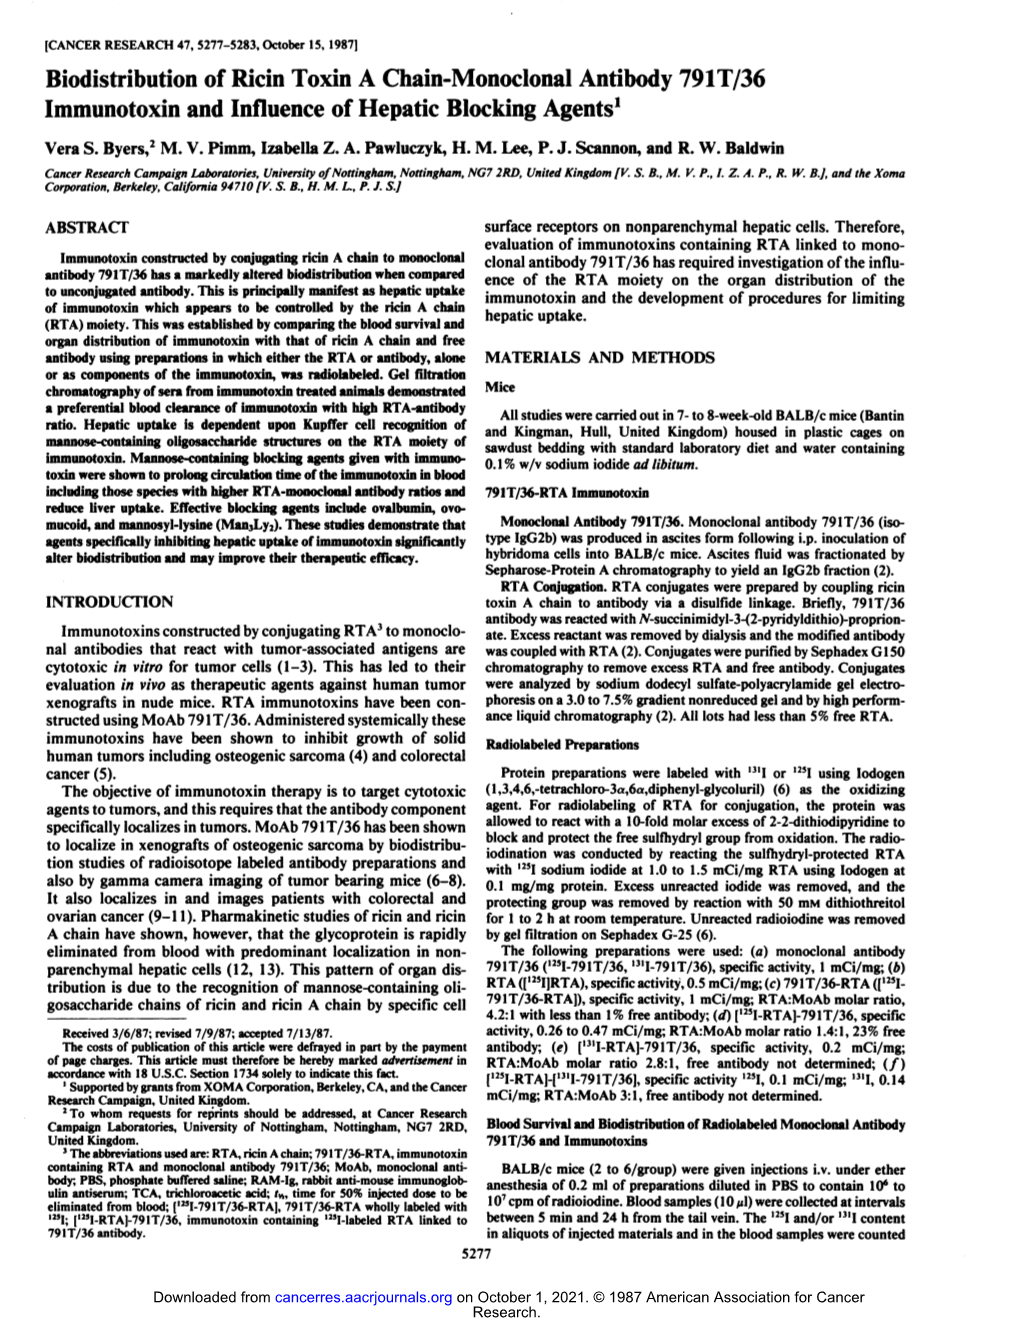 Biodistribution of Ricin Toxin a Chain-Monoclonal Antibody 79IT/36 Immunotoxin and Influence of Hepatic Blocking Agents1